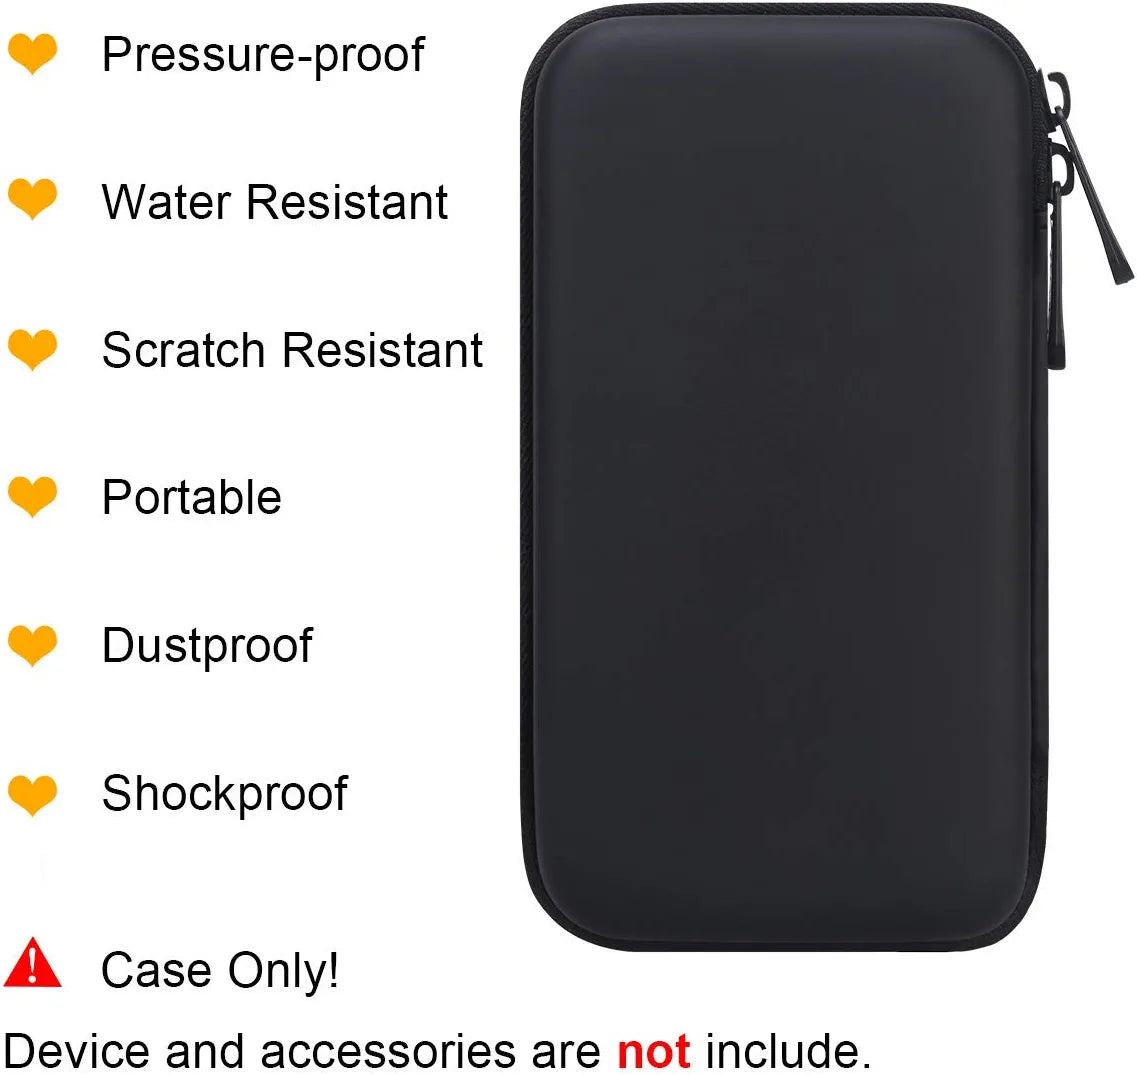 ProCase Hard Travel Electronic Organizer Case for MacBook Power Adapter  Chargers Cables Power Bank Apple Magic Mouse Apple Pencil USB Flash Disk SD